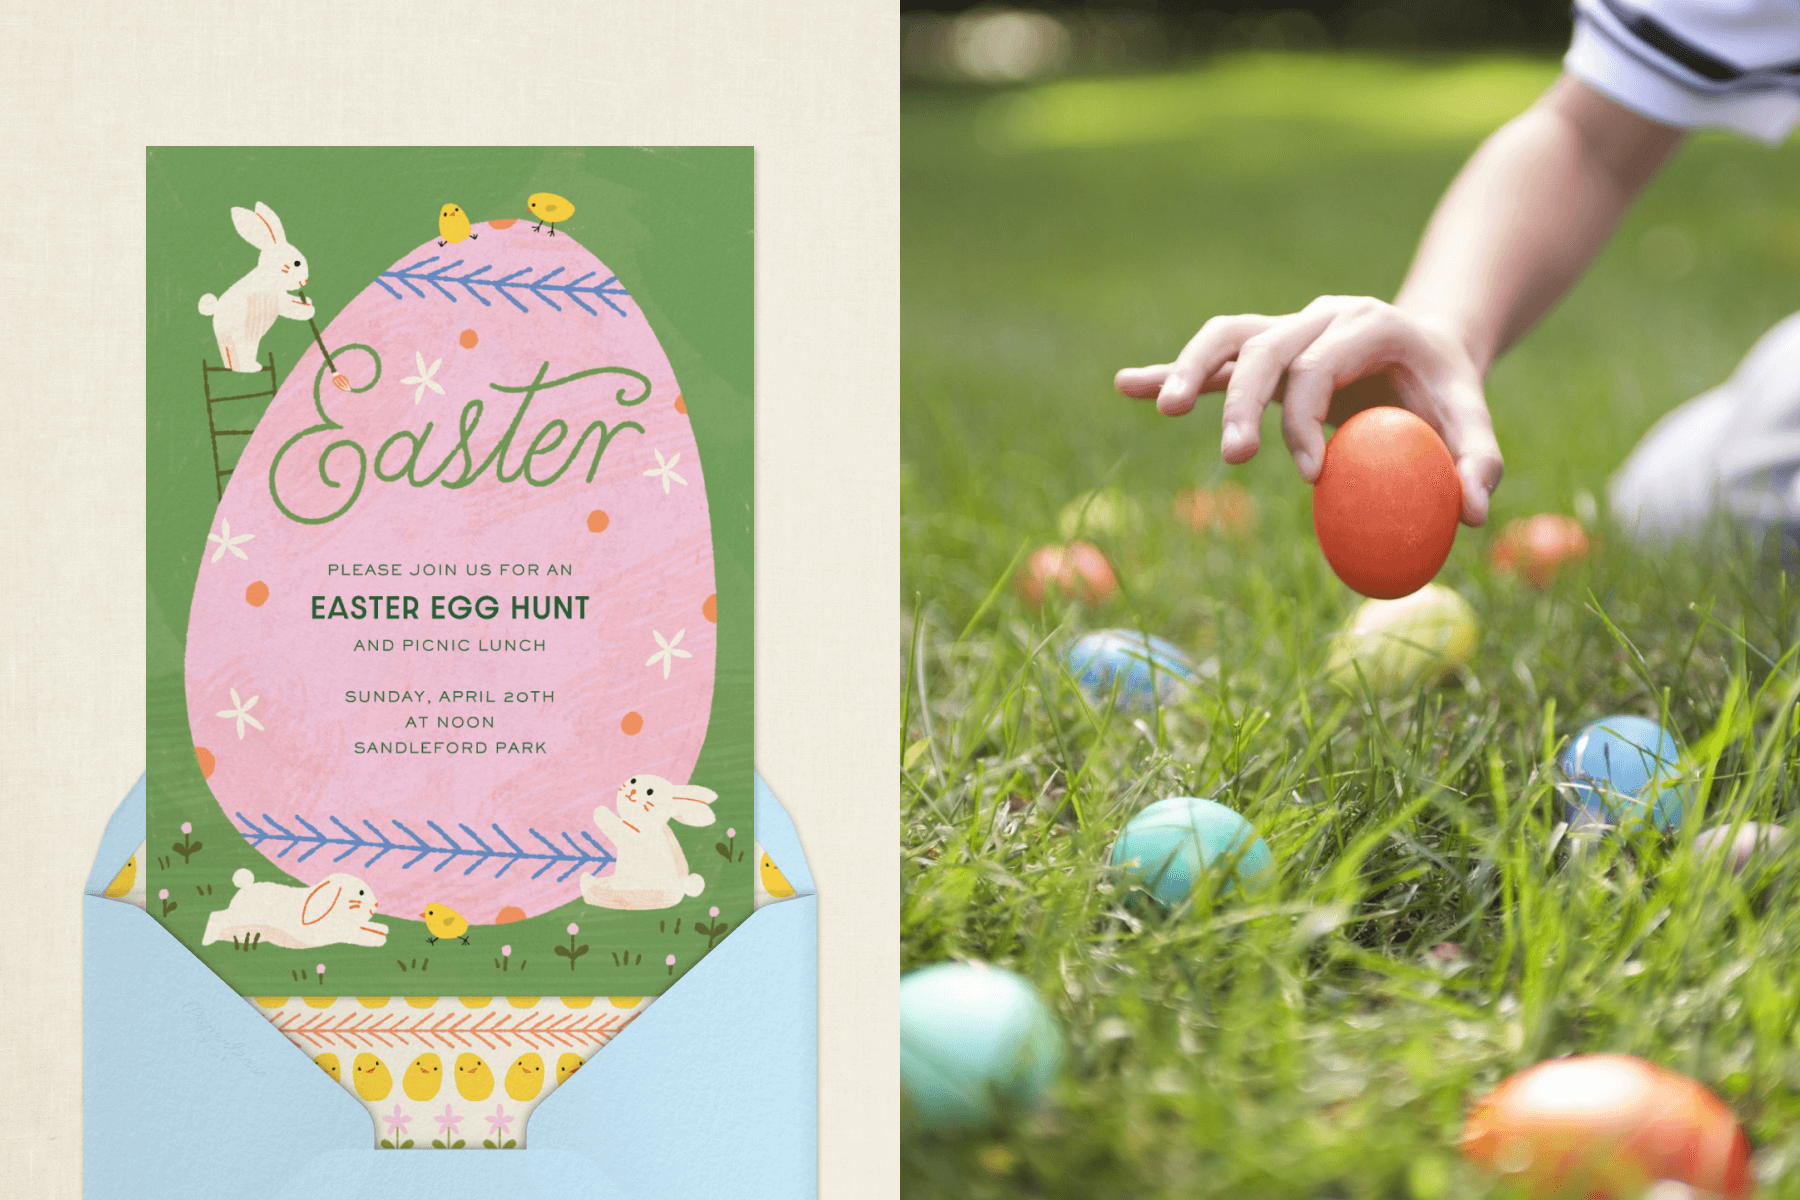 11 party ideas for Easter that will have the whole family hopping for joy